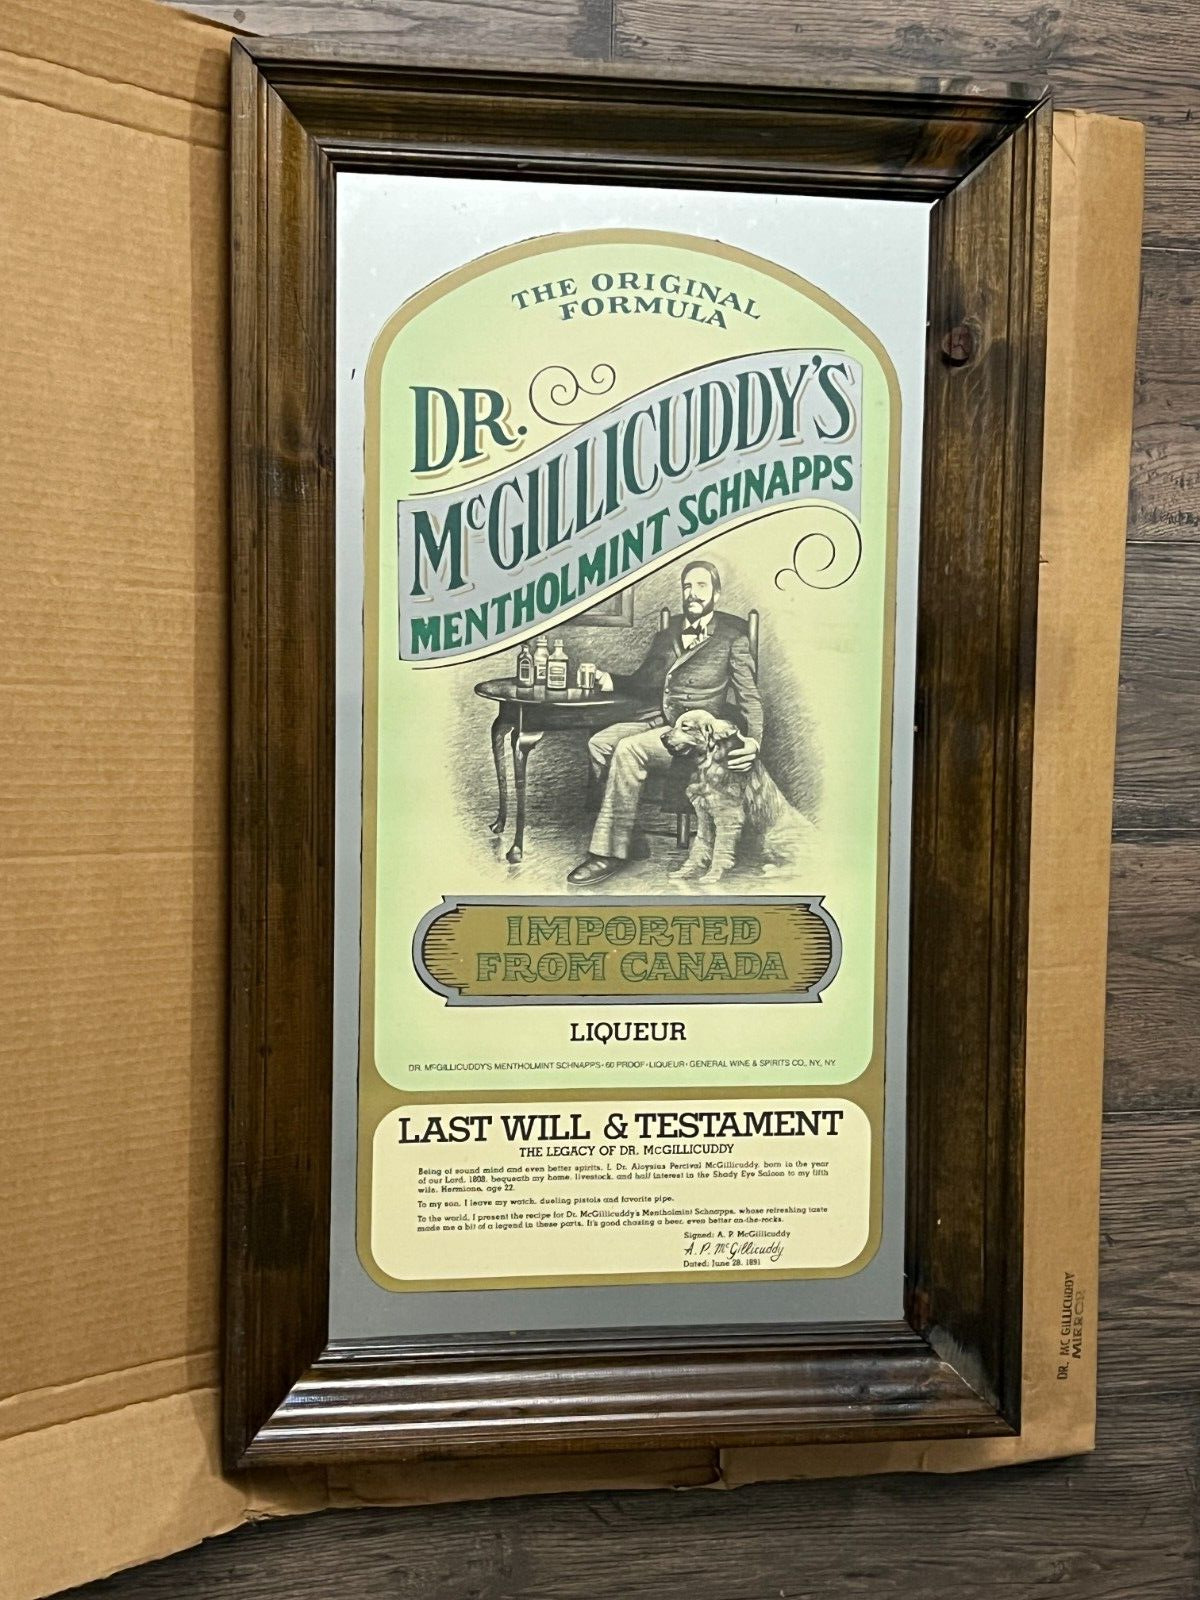 NOS DR. McGILLICUDDY'S MENTHOLMINT SCHNAPPS LAST WILL & TESTAMENT MIRROR LARGE